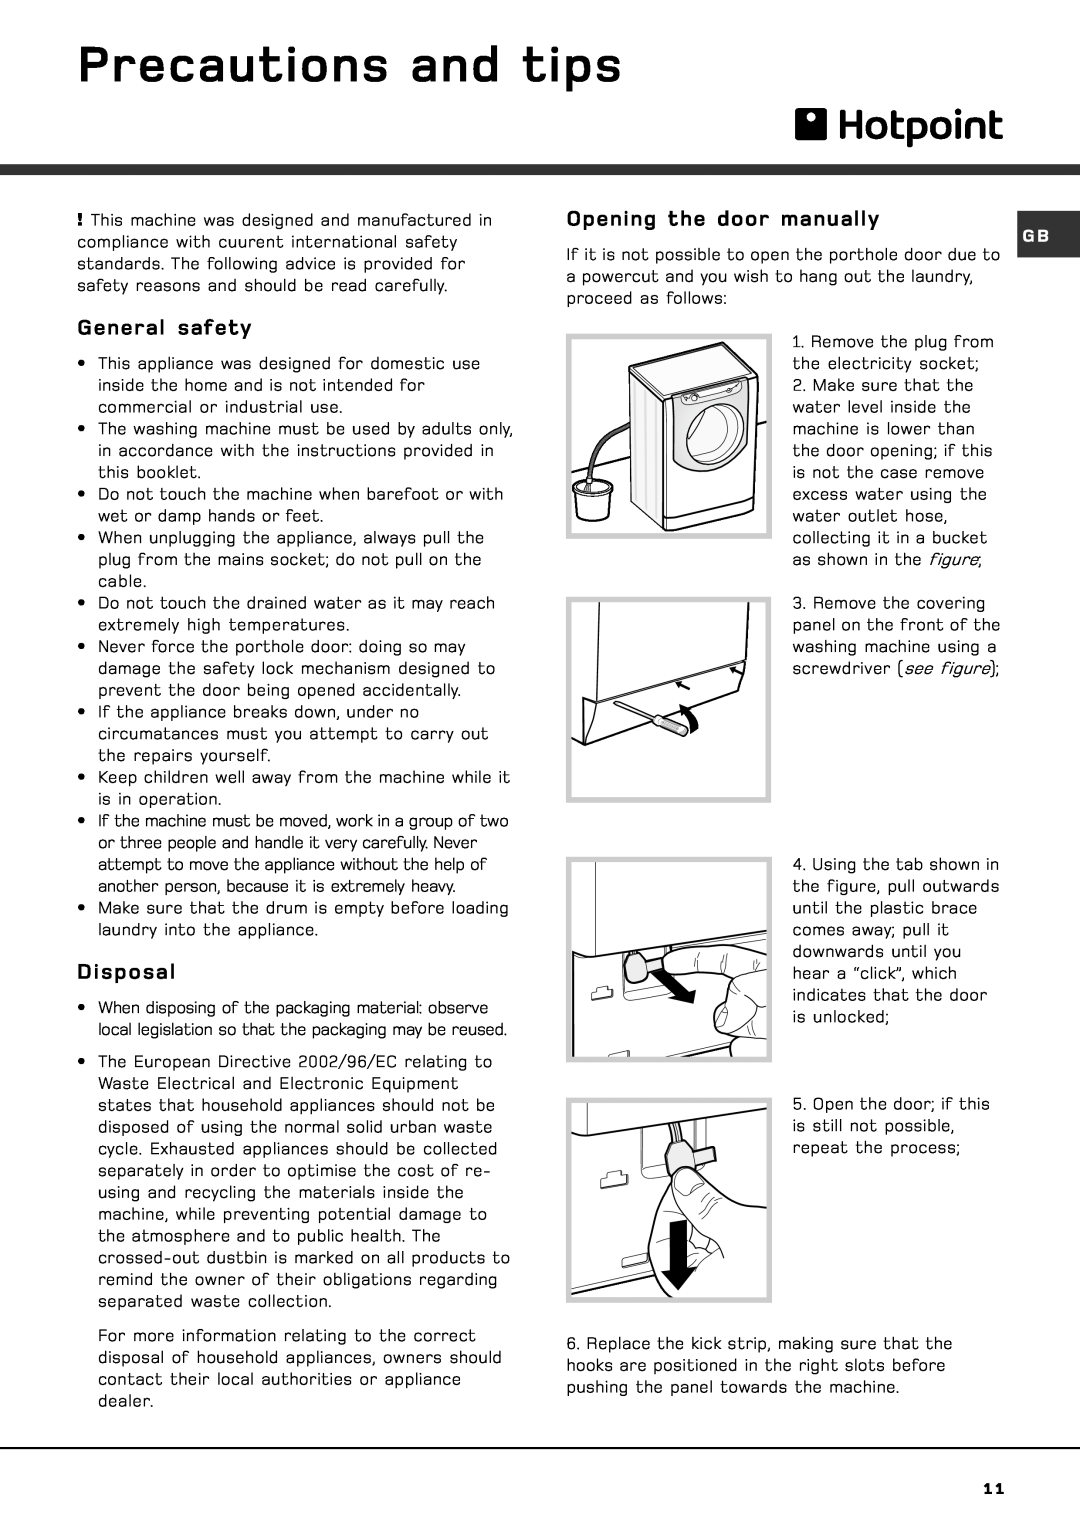 Hotpoint AQXXD 169 Precautions and tips, Opening the door manually, General safety, Disposal 